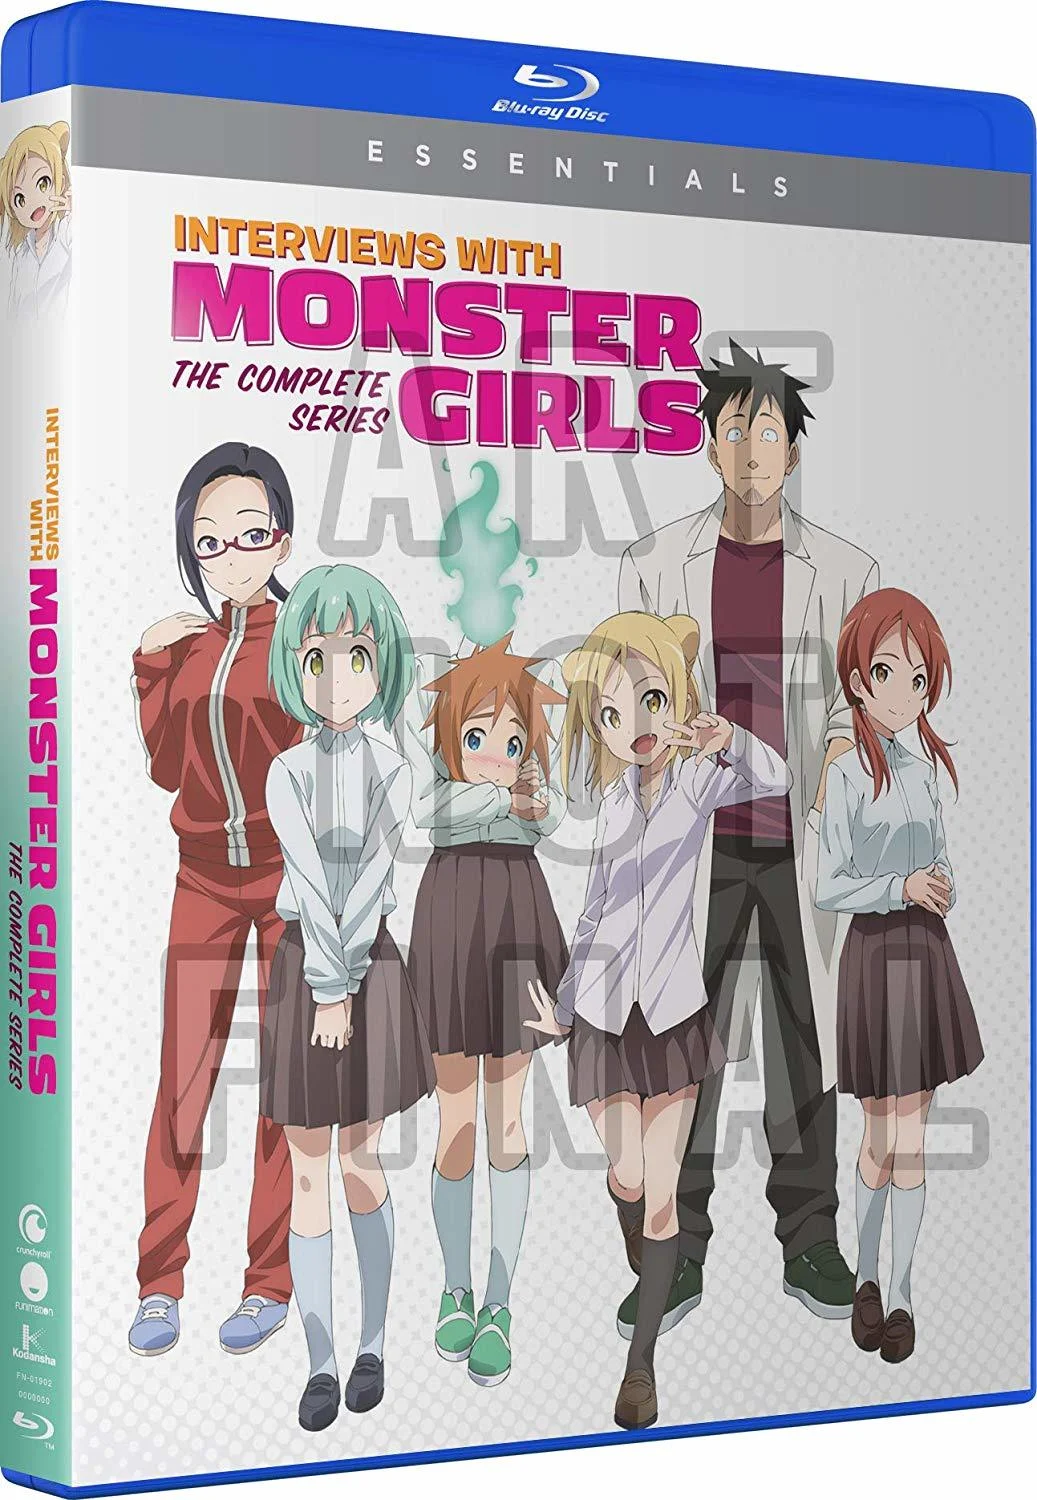 Interviews with Monster Girls: The Complete Series (Essentials) (Blu-ray) on MovieShack